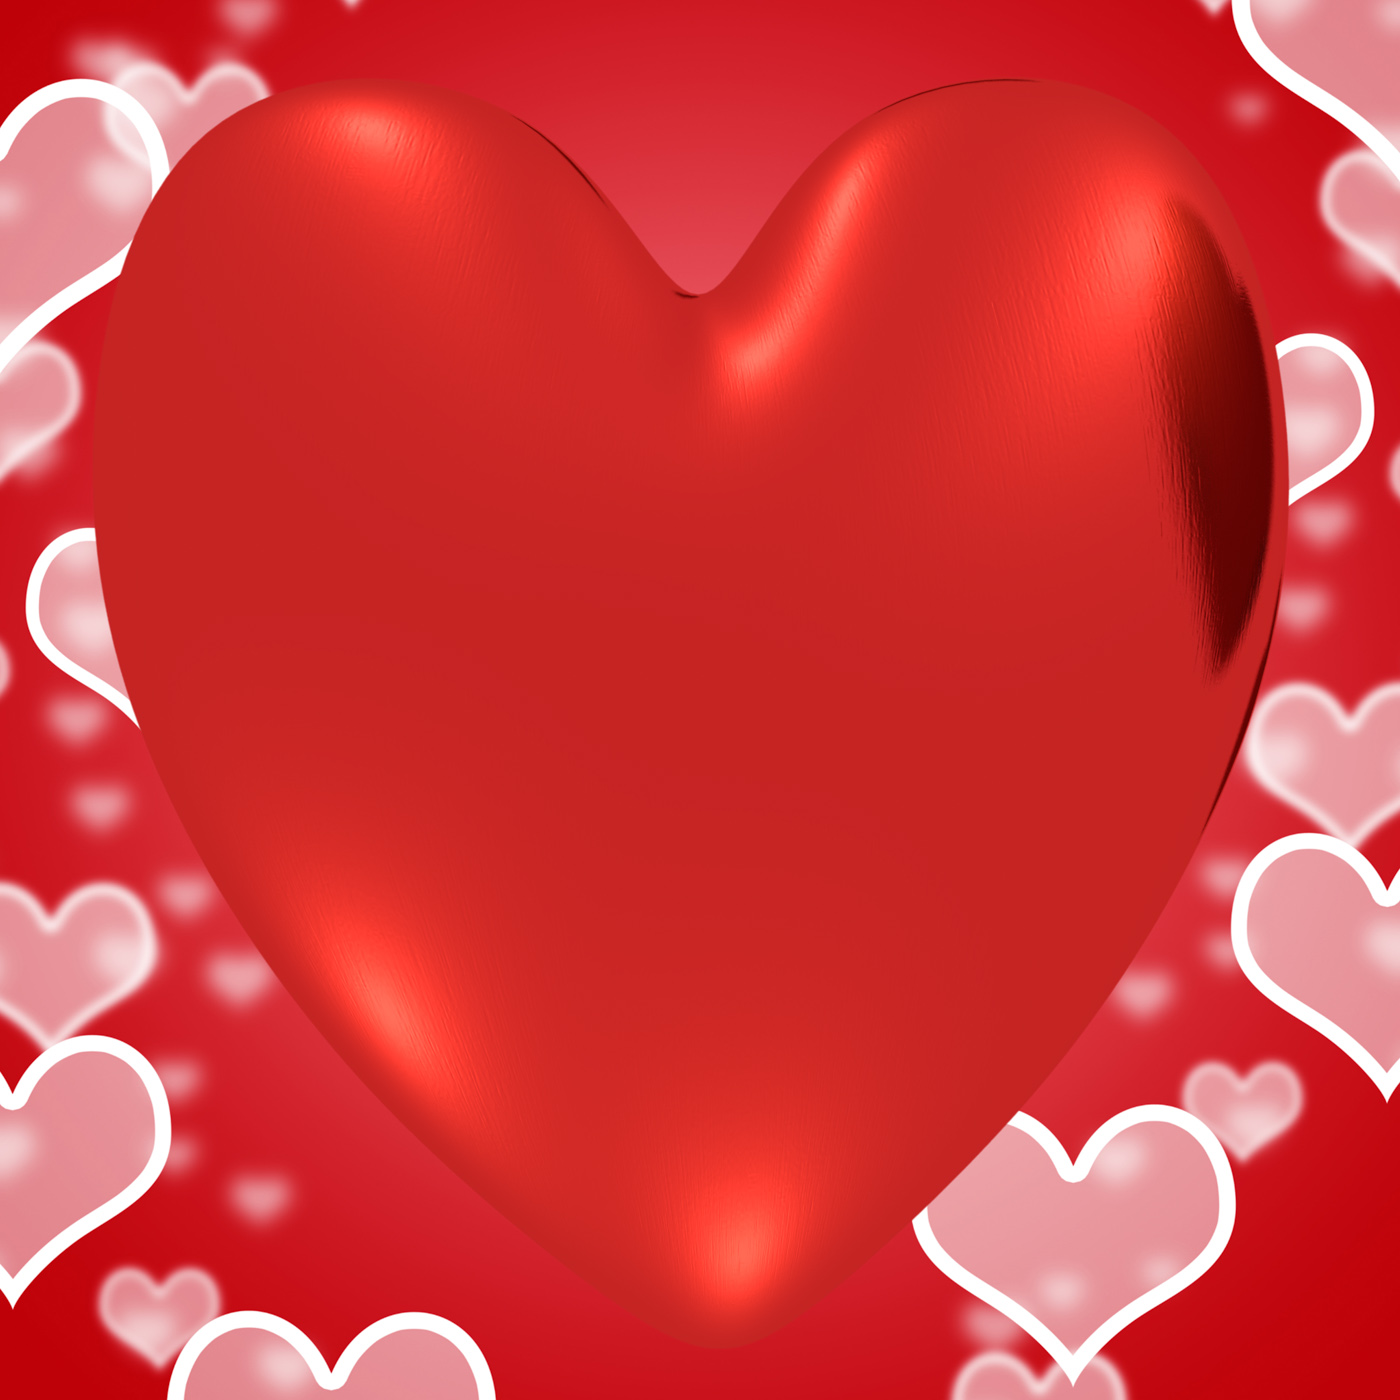 Free photo: Heart With Red Hearts Background Showing Loving And Romance ...